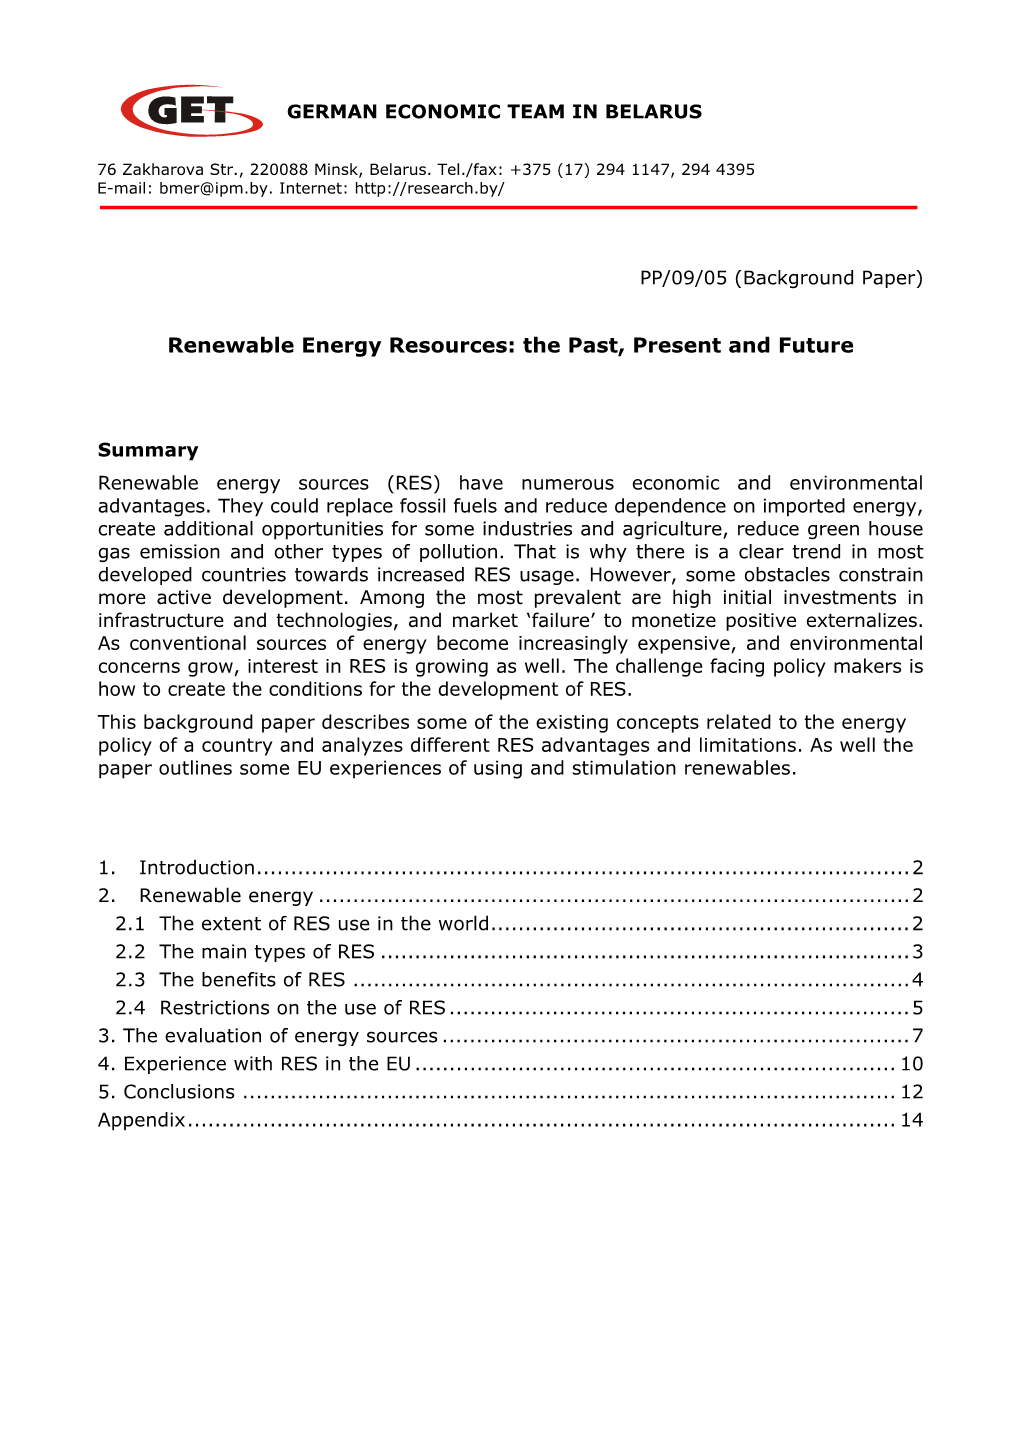 Renewable Energy Resources: the Past, Present and Future